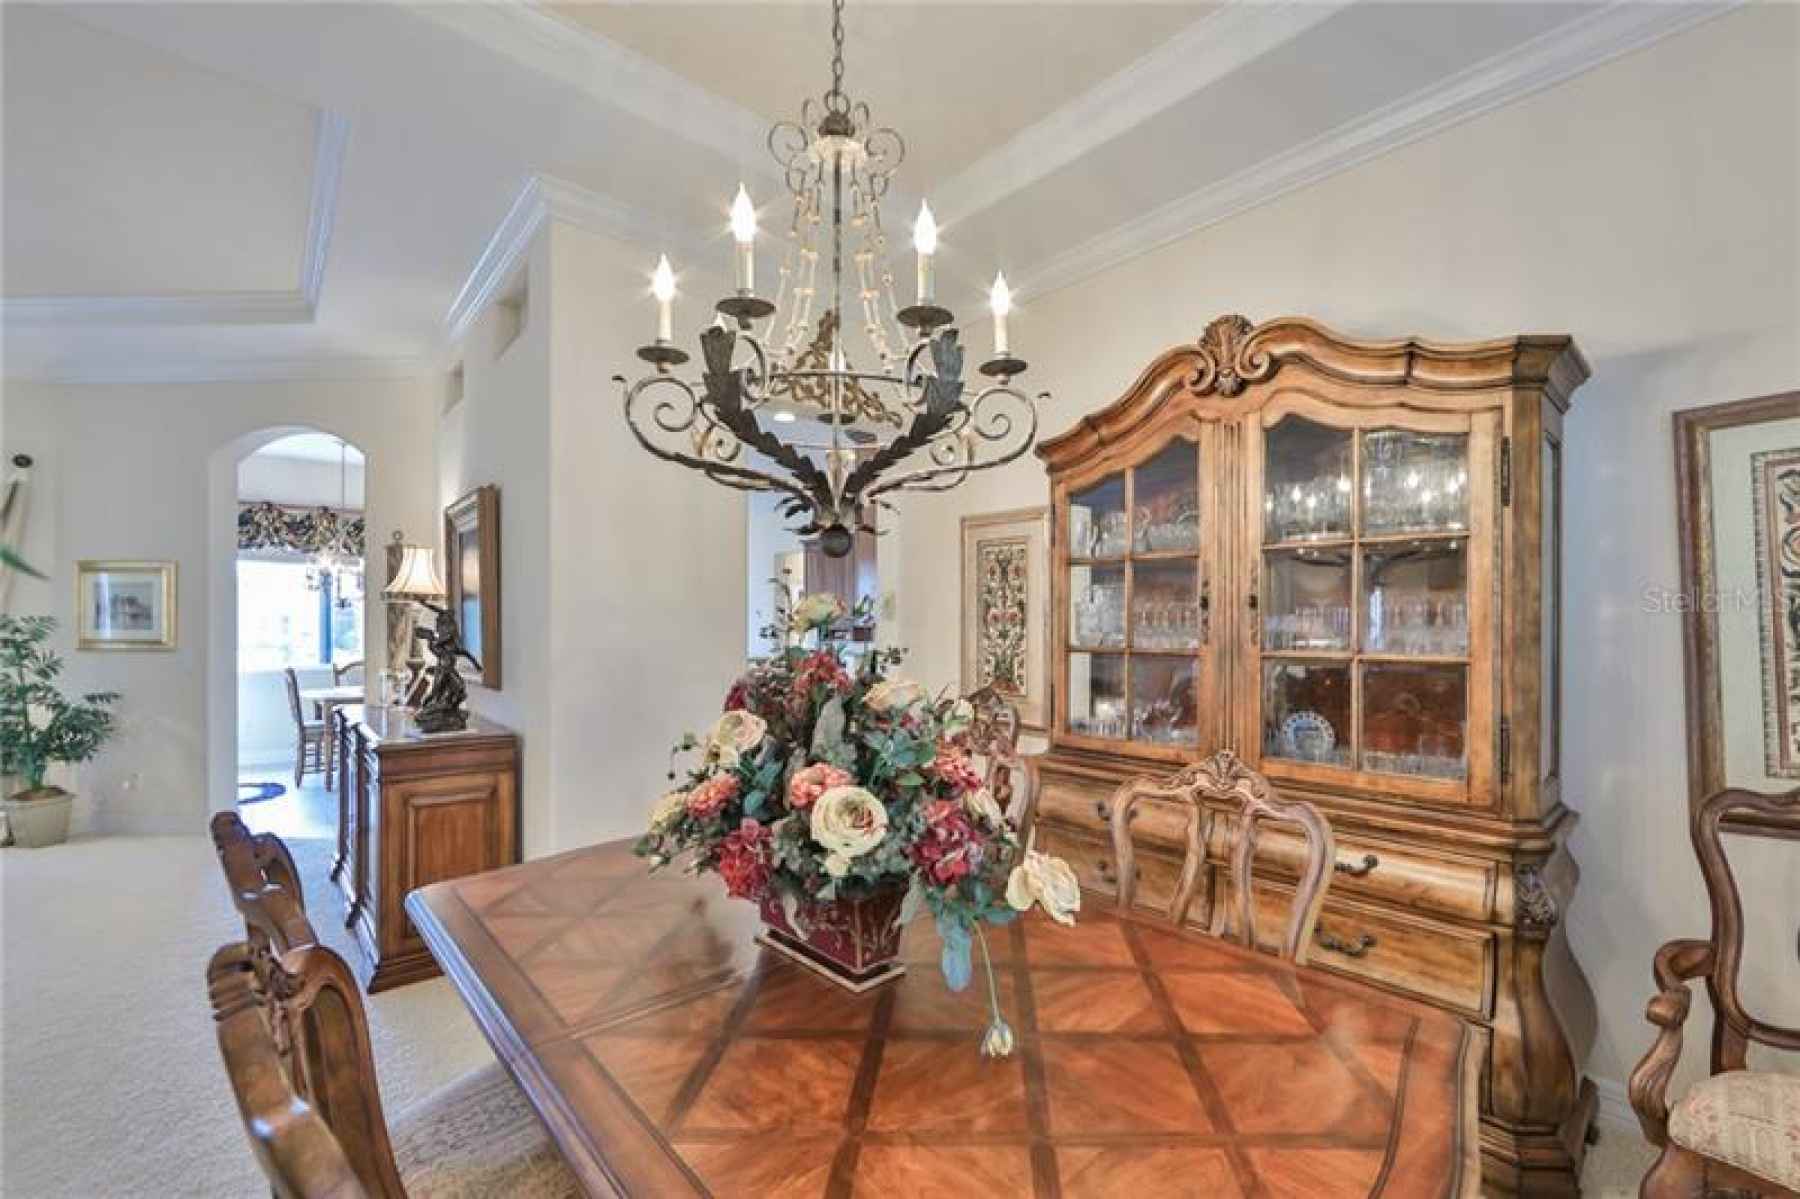 The Dining room is spacious and open to the rest of the house with handsome light fixtures.